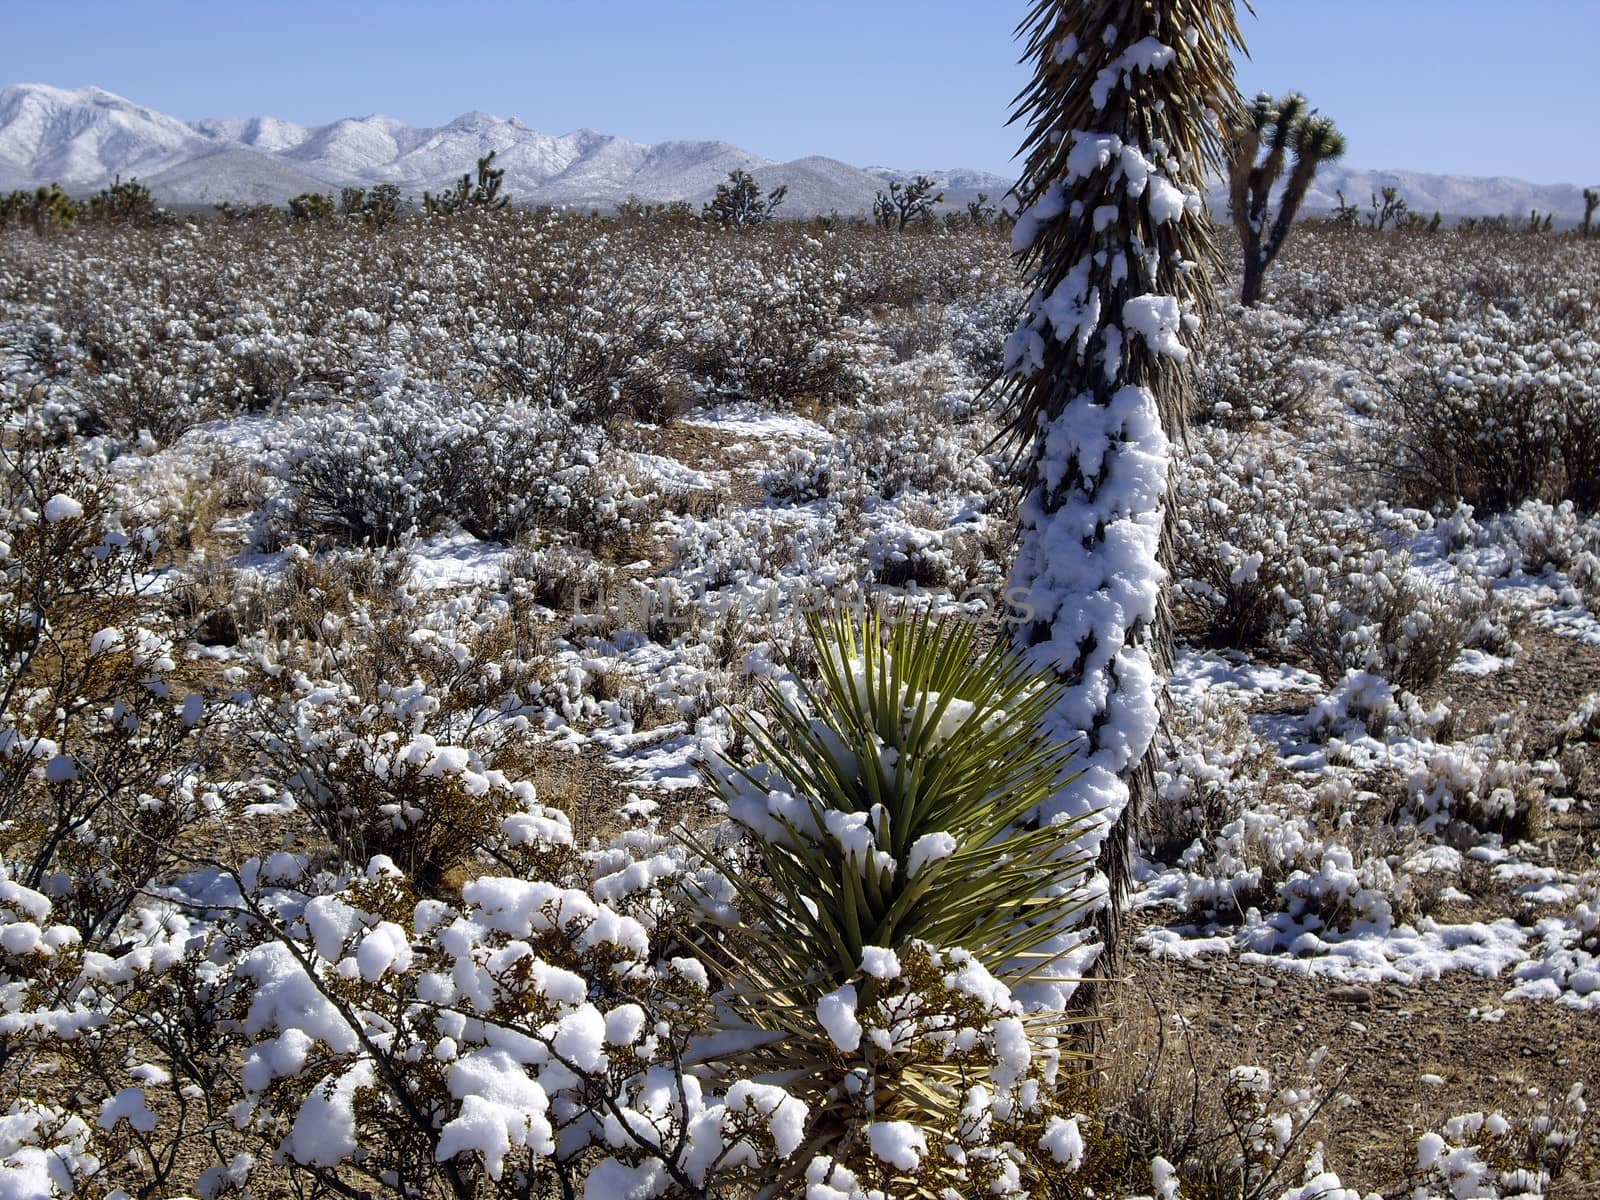 Joshua trees in Winter by emattil